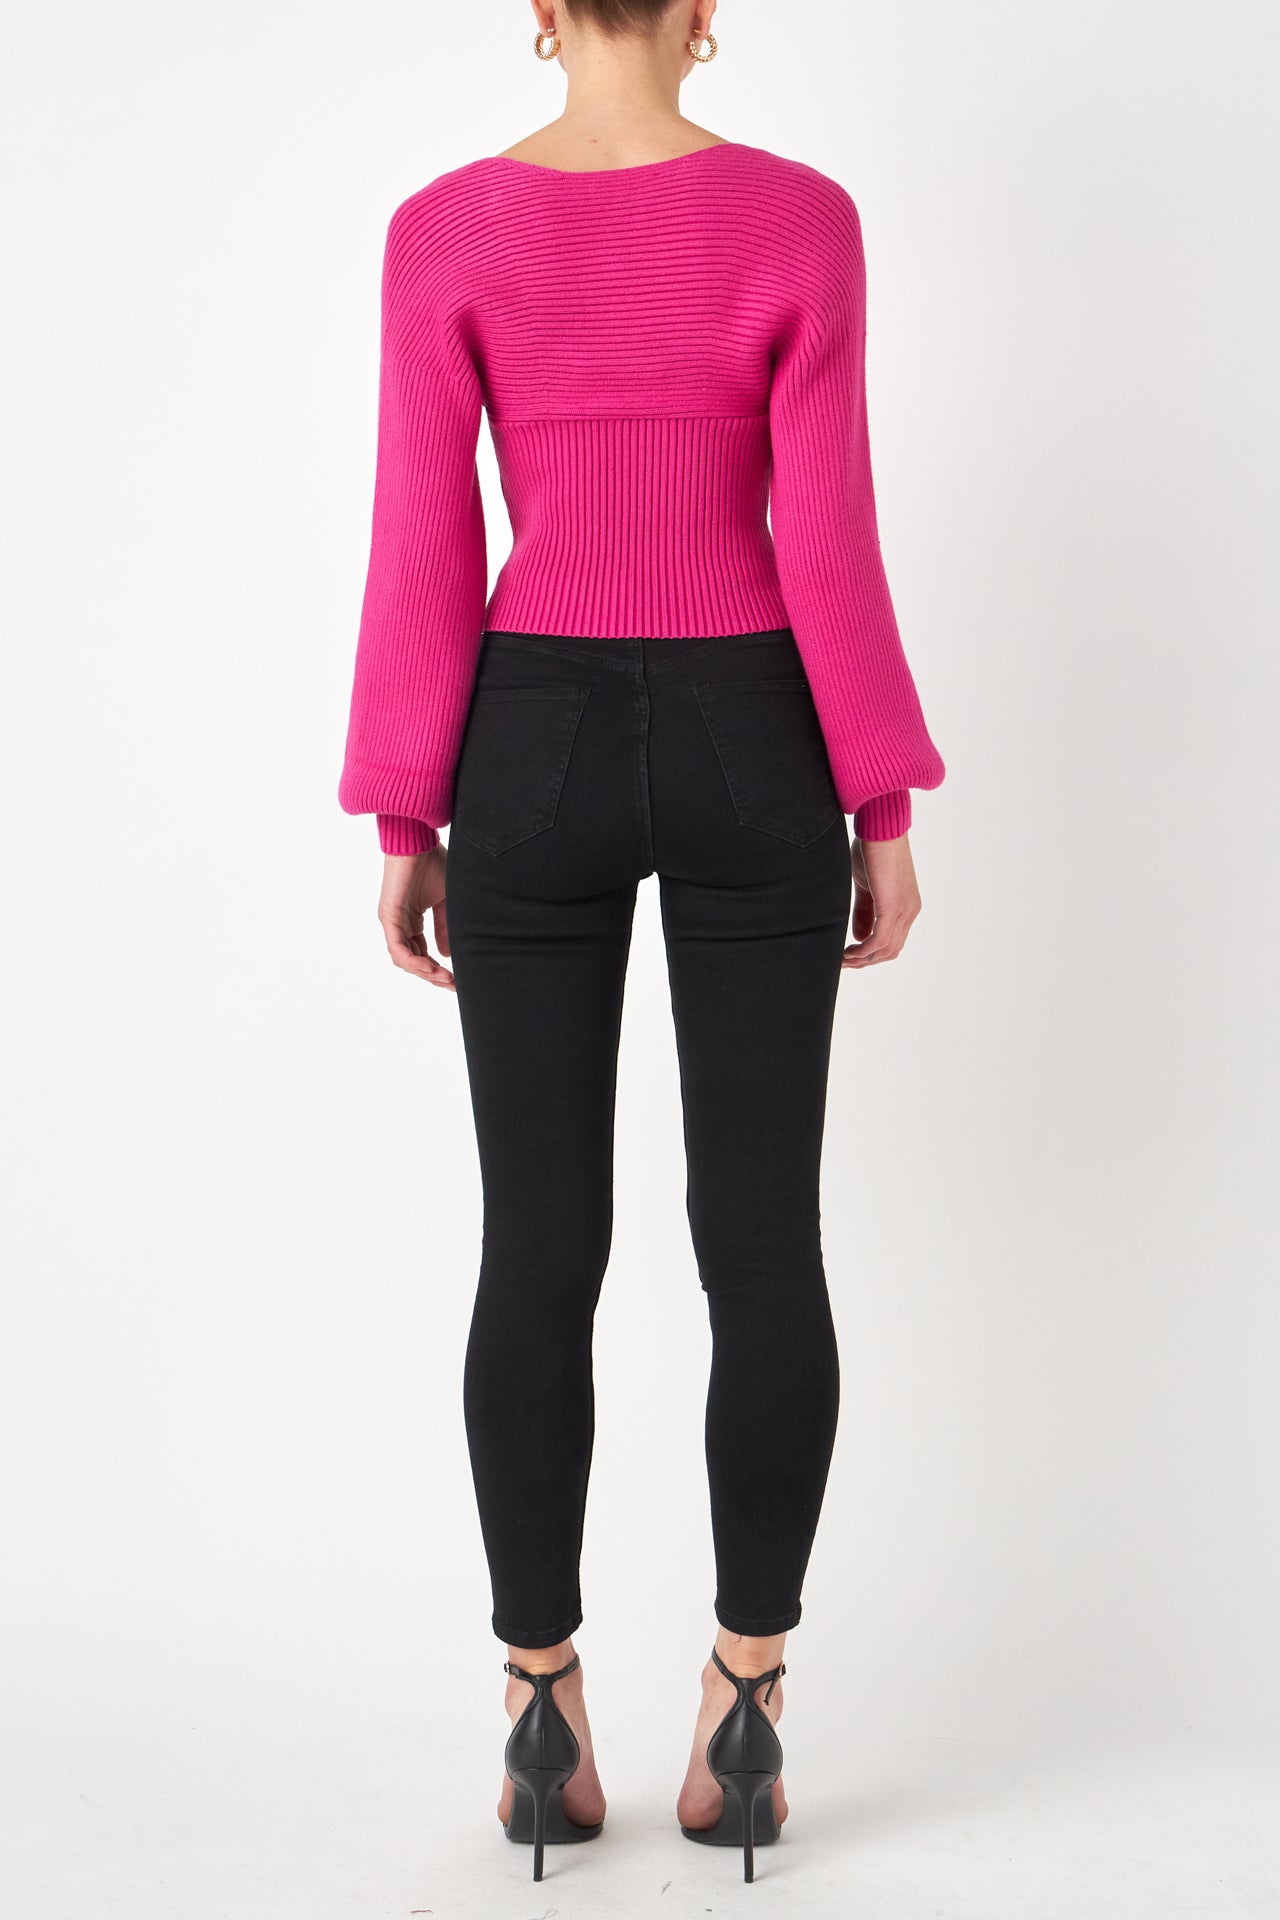 Knitted top in fuchsia featuring square neckline, ribbed detailing, balloon sleeves. Back view.